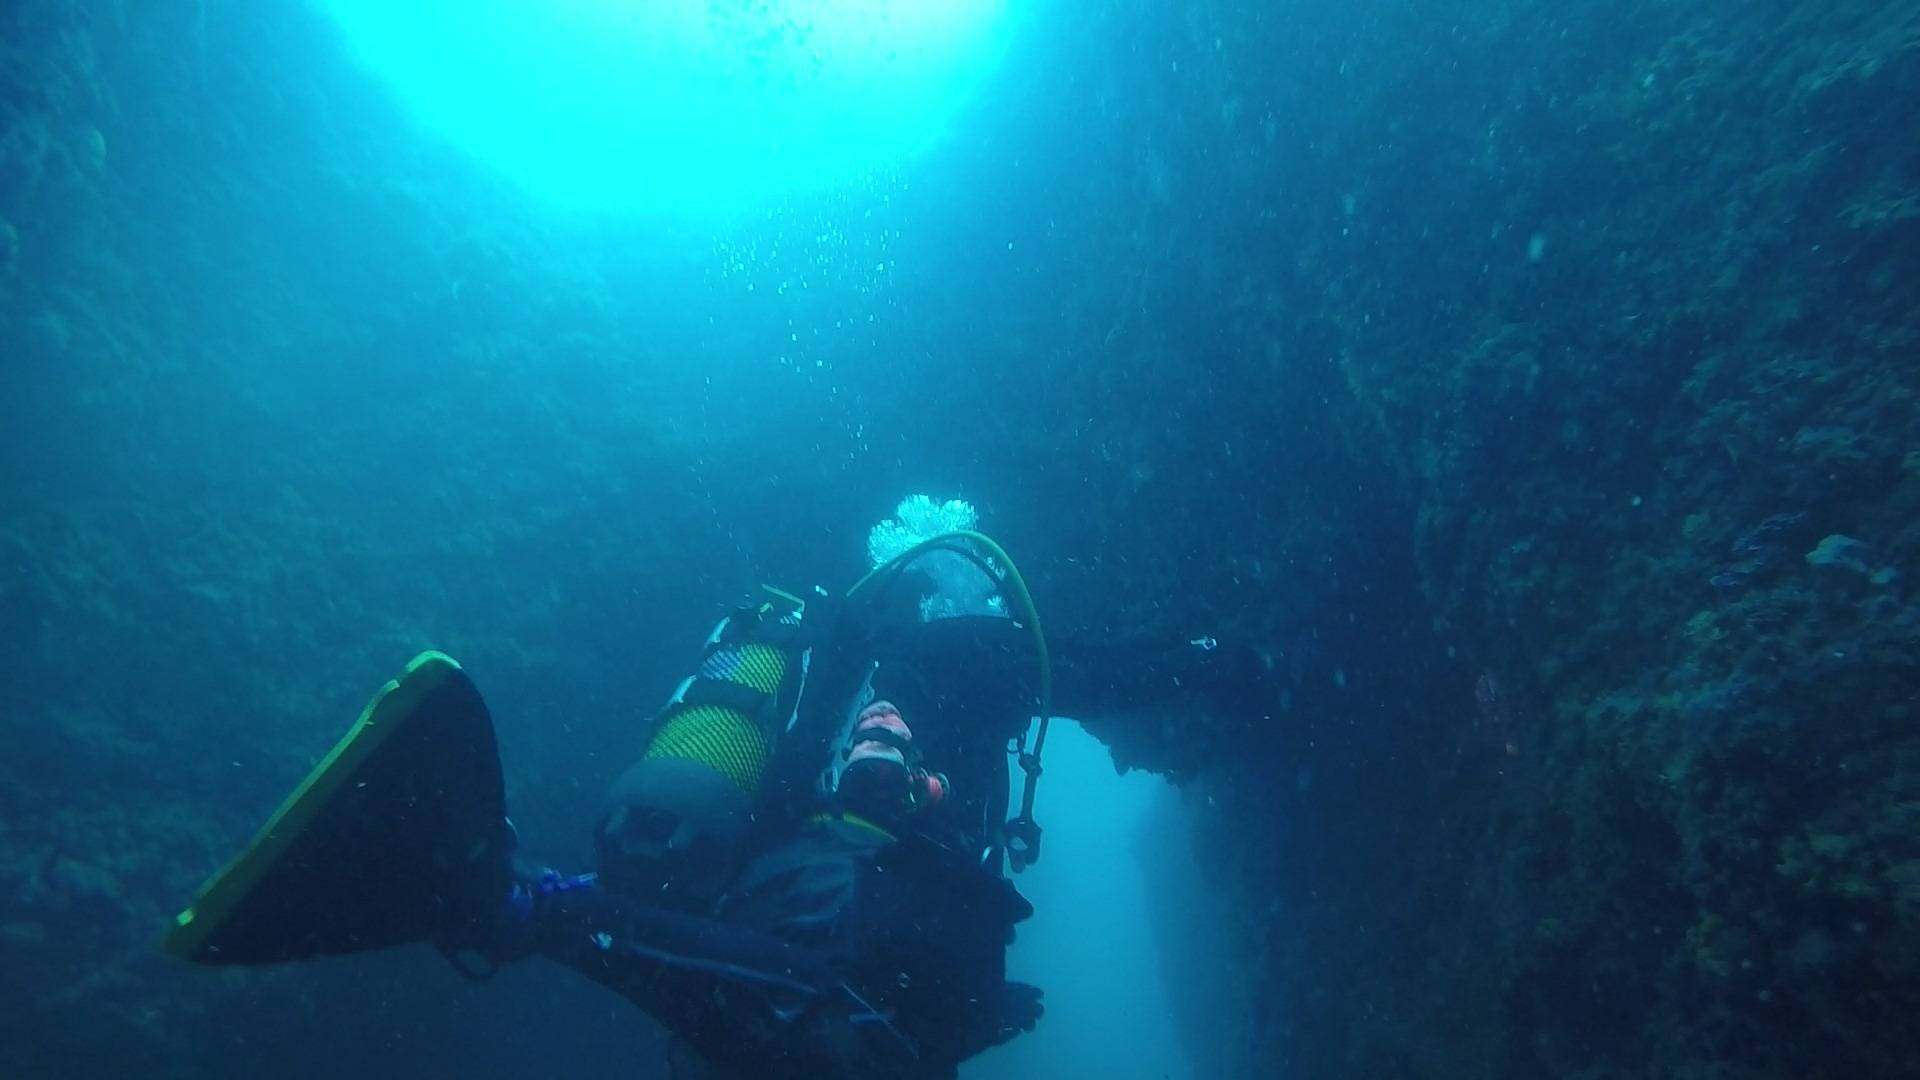 My diving partner guiding the dive through the underwater cave.